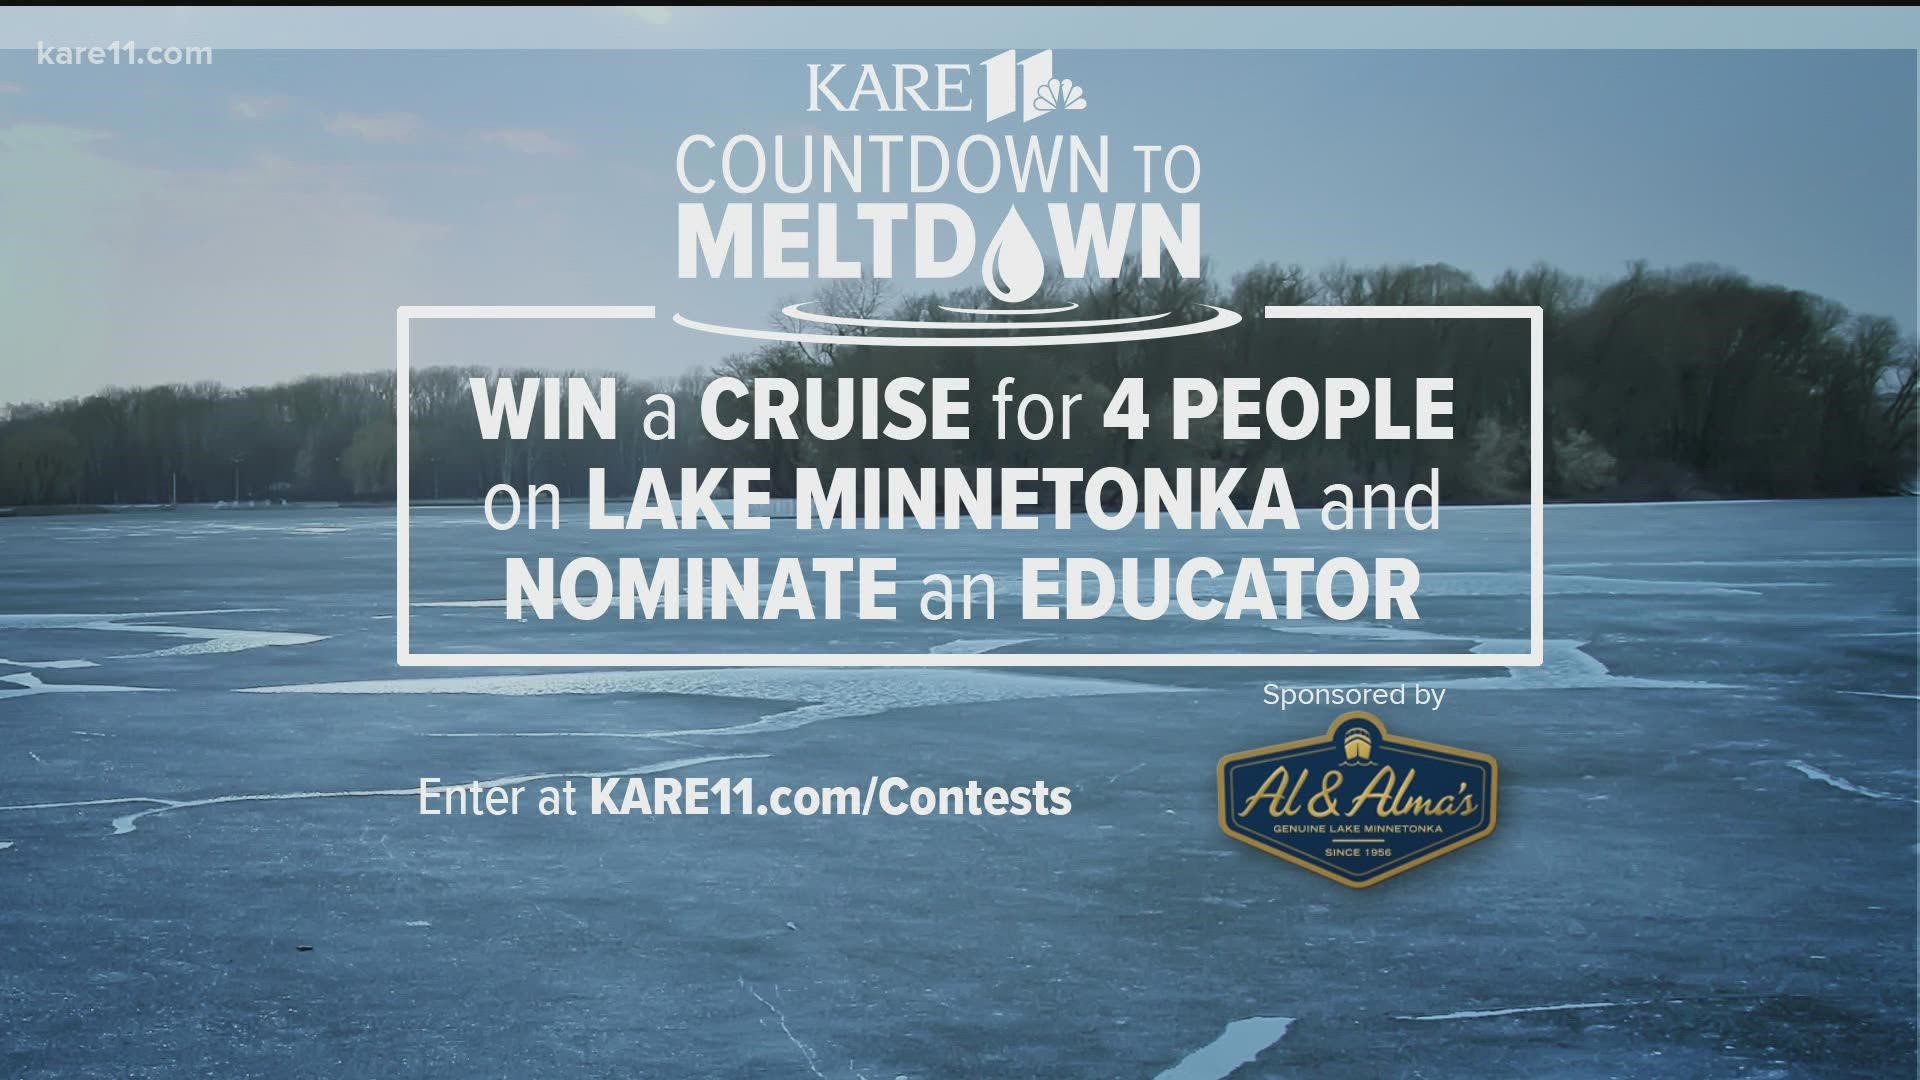 The grand prize winner could win four tickets to Al & Alma's Boat Cruise.